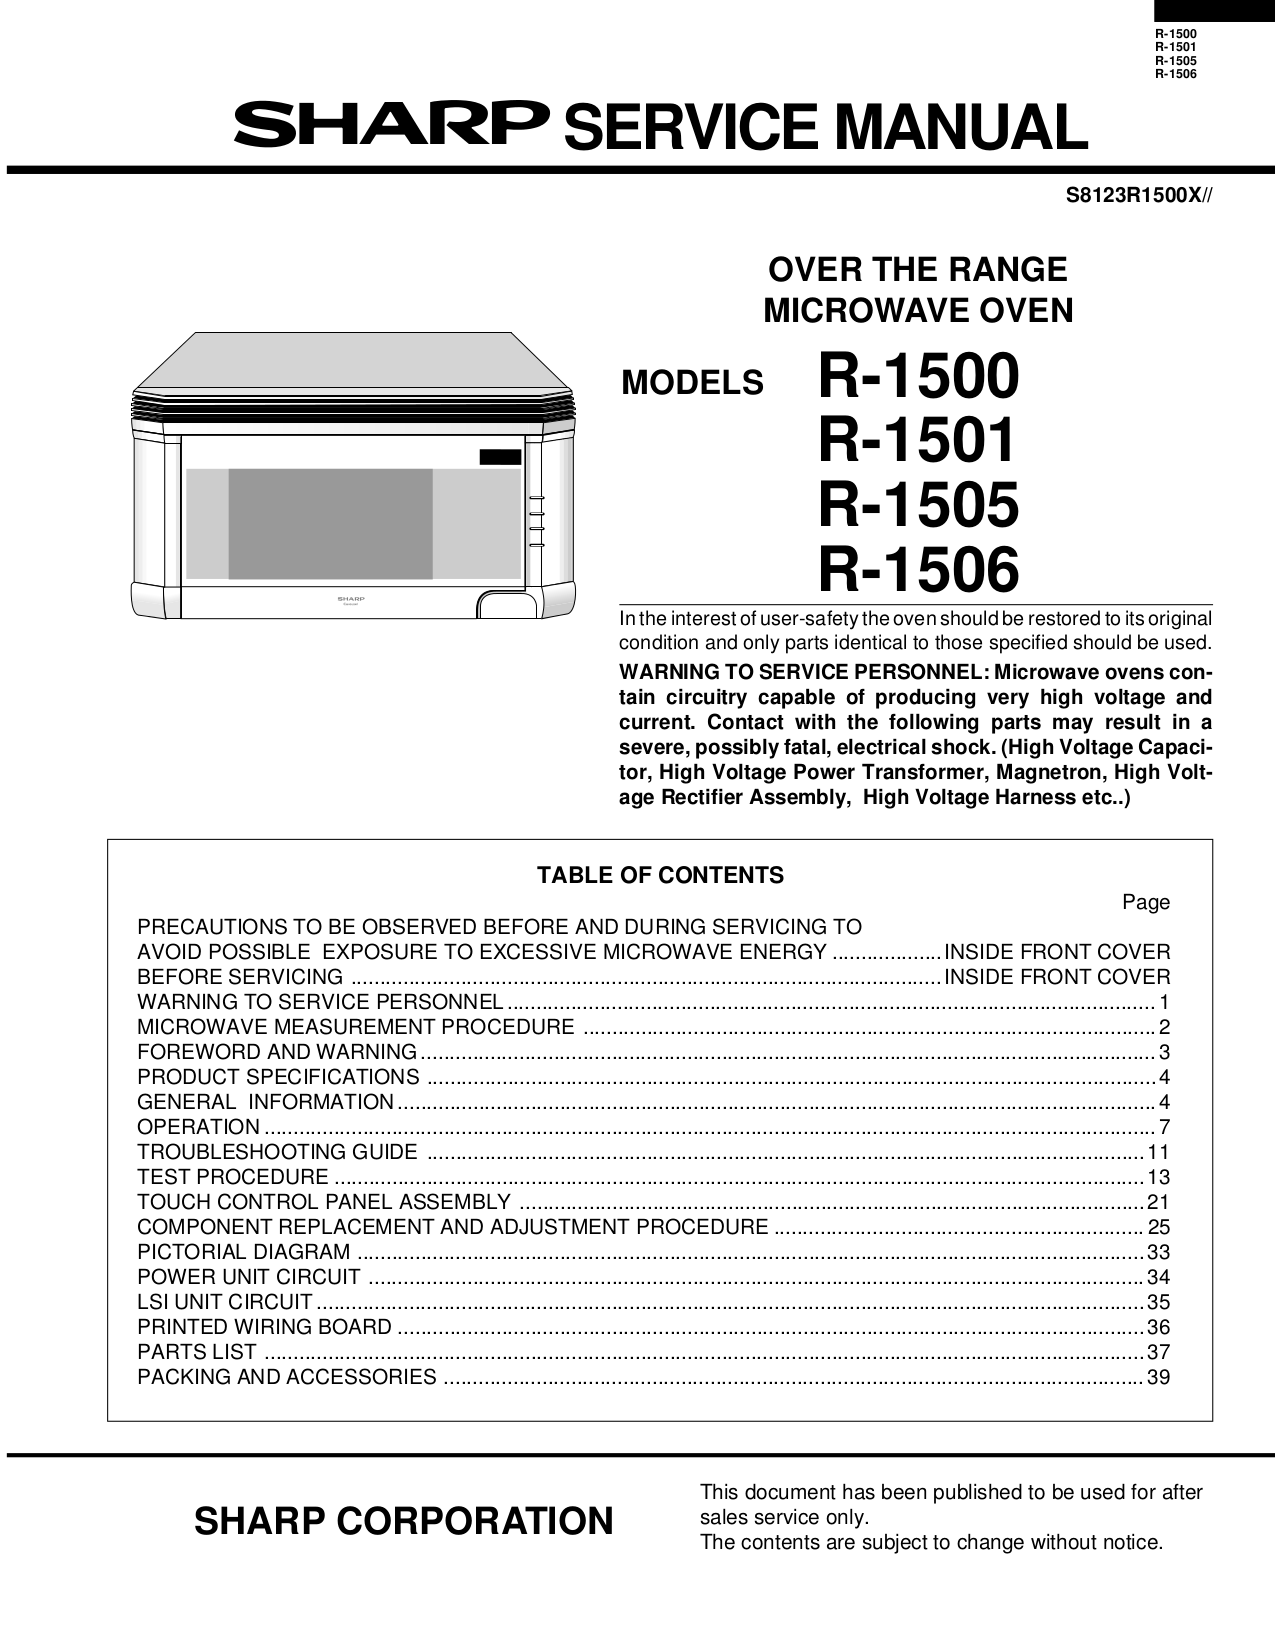 Download free pdf for Sharp R-1501 Microwave manual